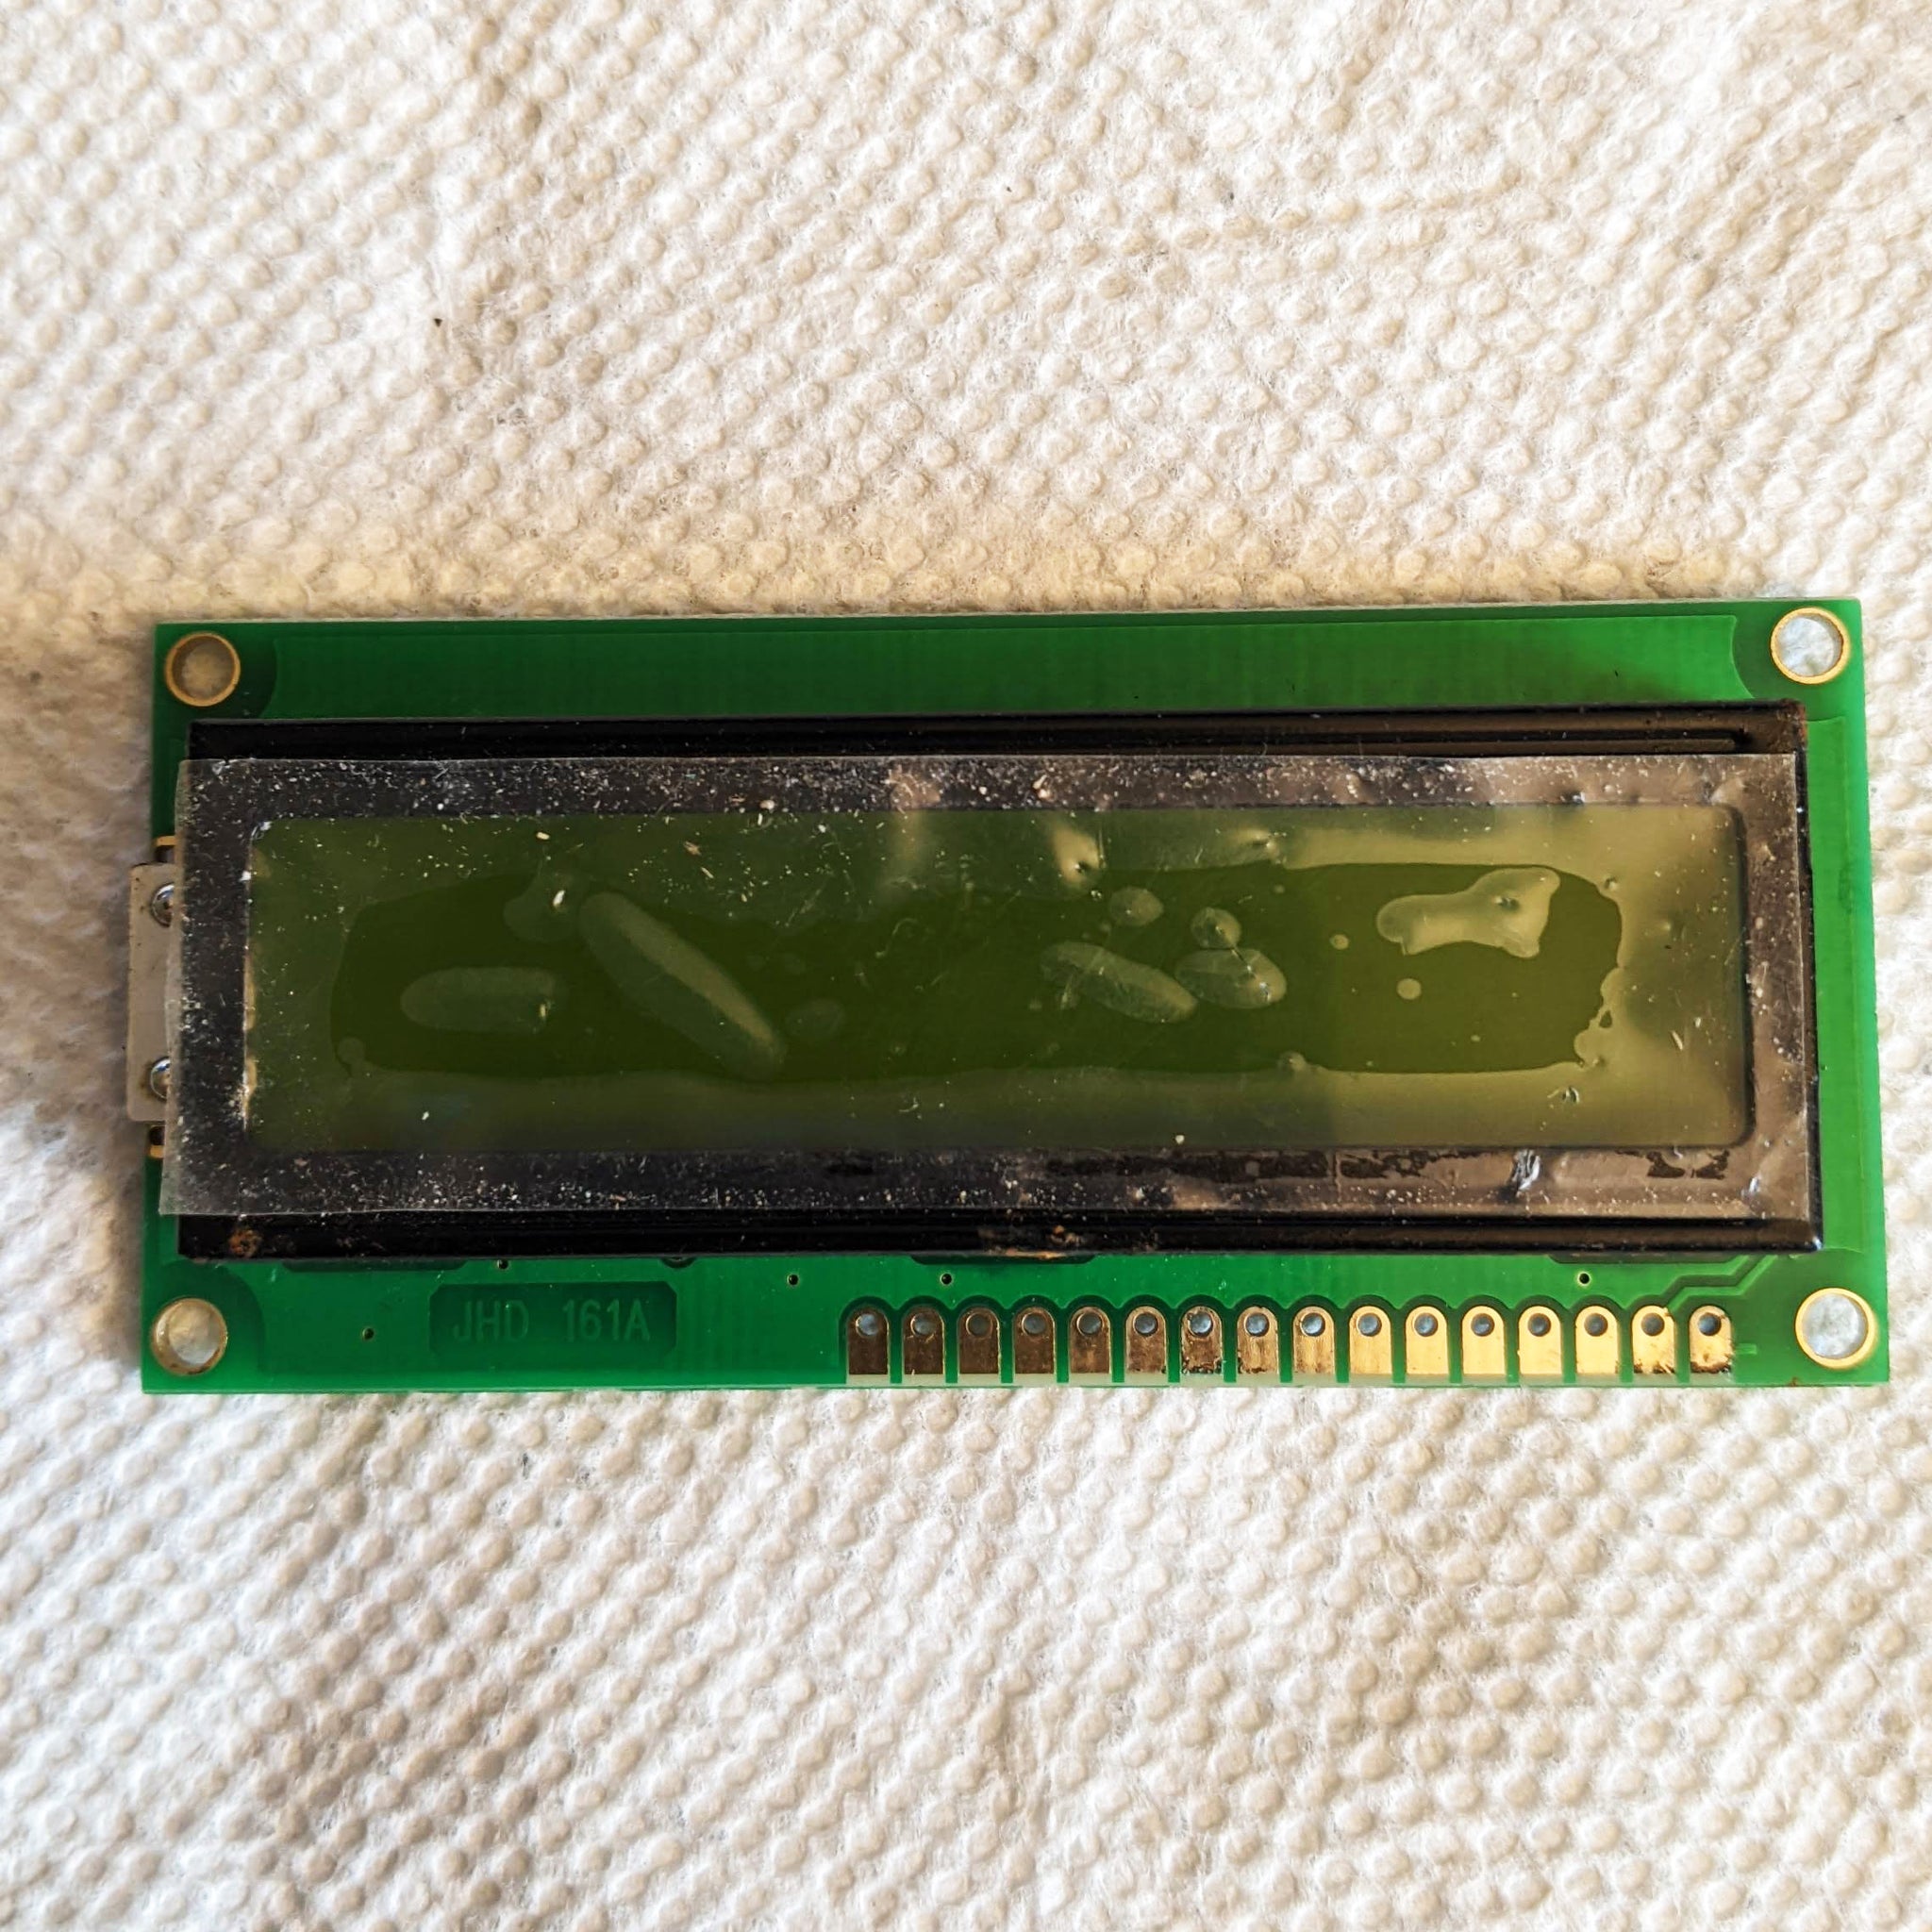 JHD Green Yellow LCD Display Module JHD 161A, New Old Stock